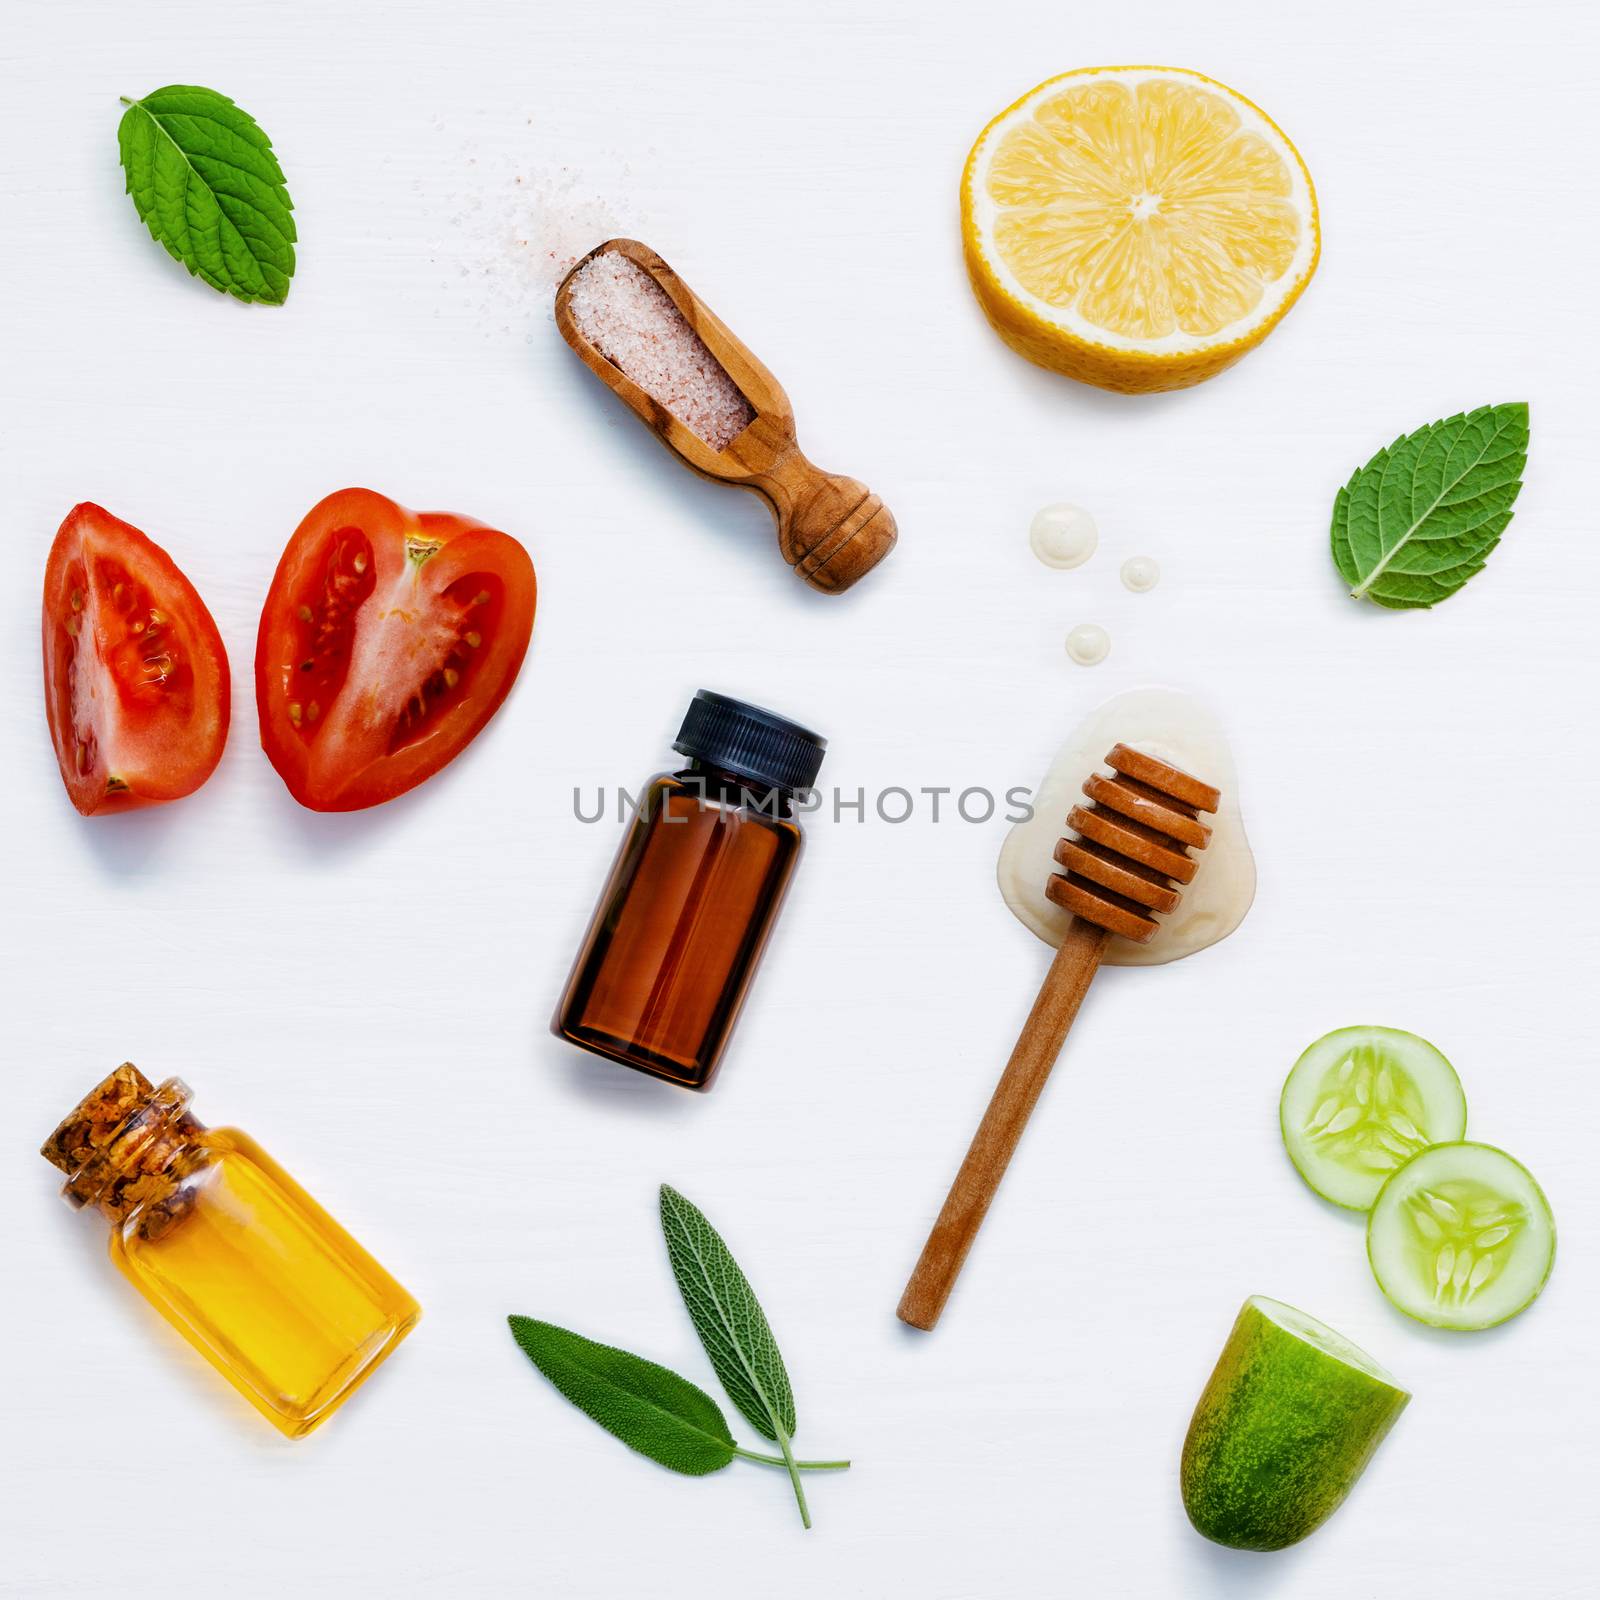 Homemade skin care and body scrubs with natural ingredients aloe vera ,lemon,cucumber ,himalayan salt ,tomato,mint and honey set up on white wooden background with flat lay.